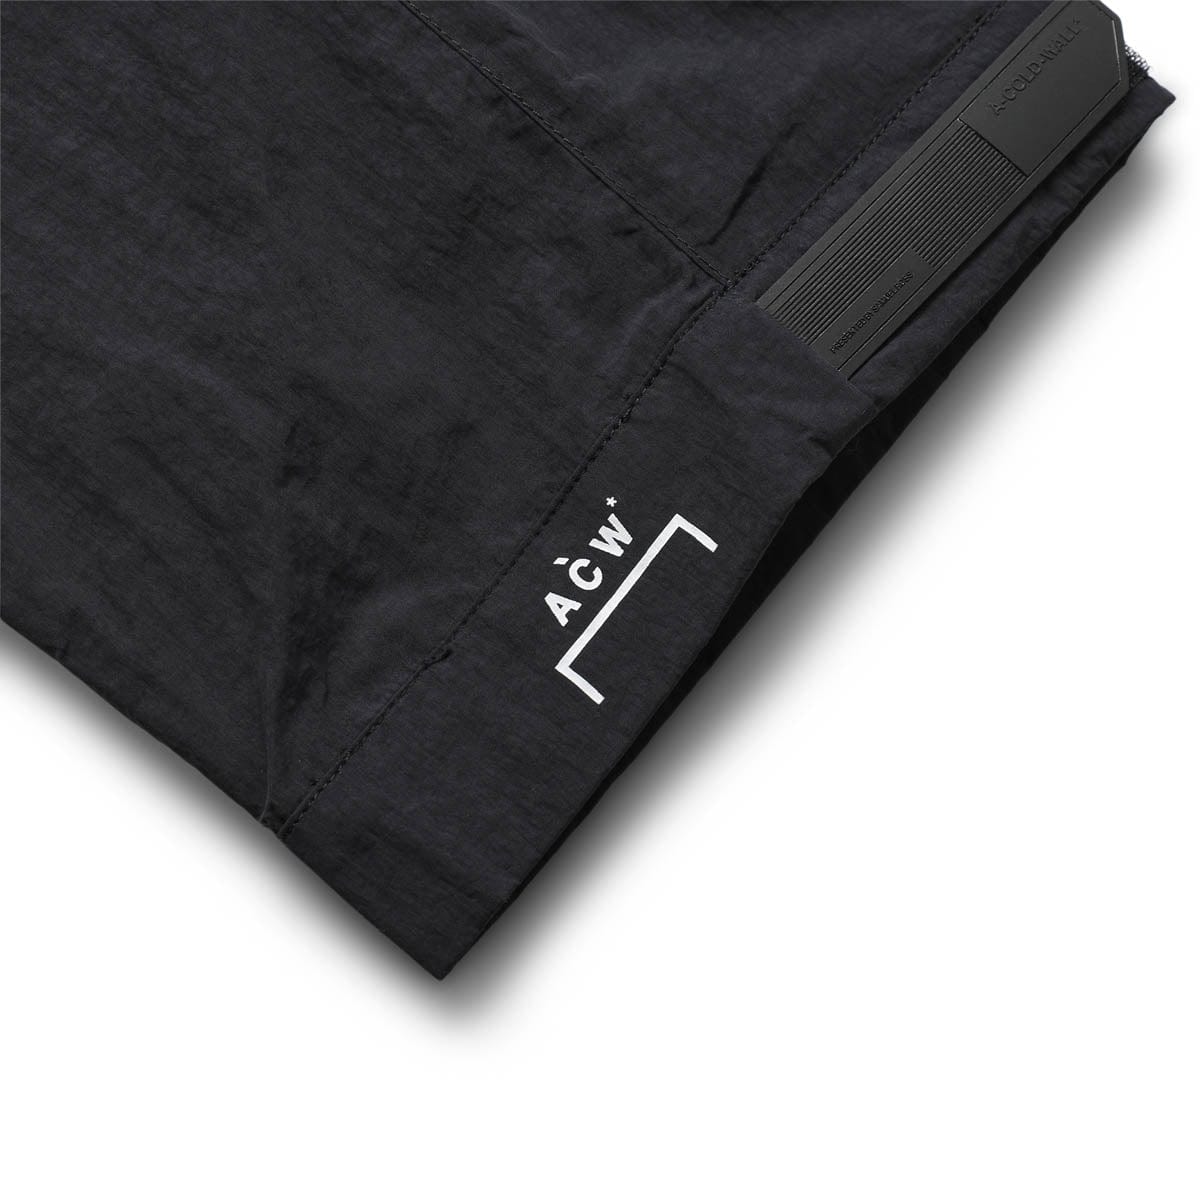 A-COLD-WALL* Black 3L Tech Trousers A-Cold-Wall*